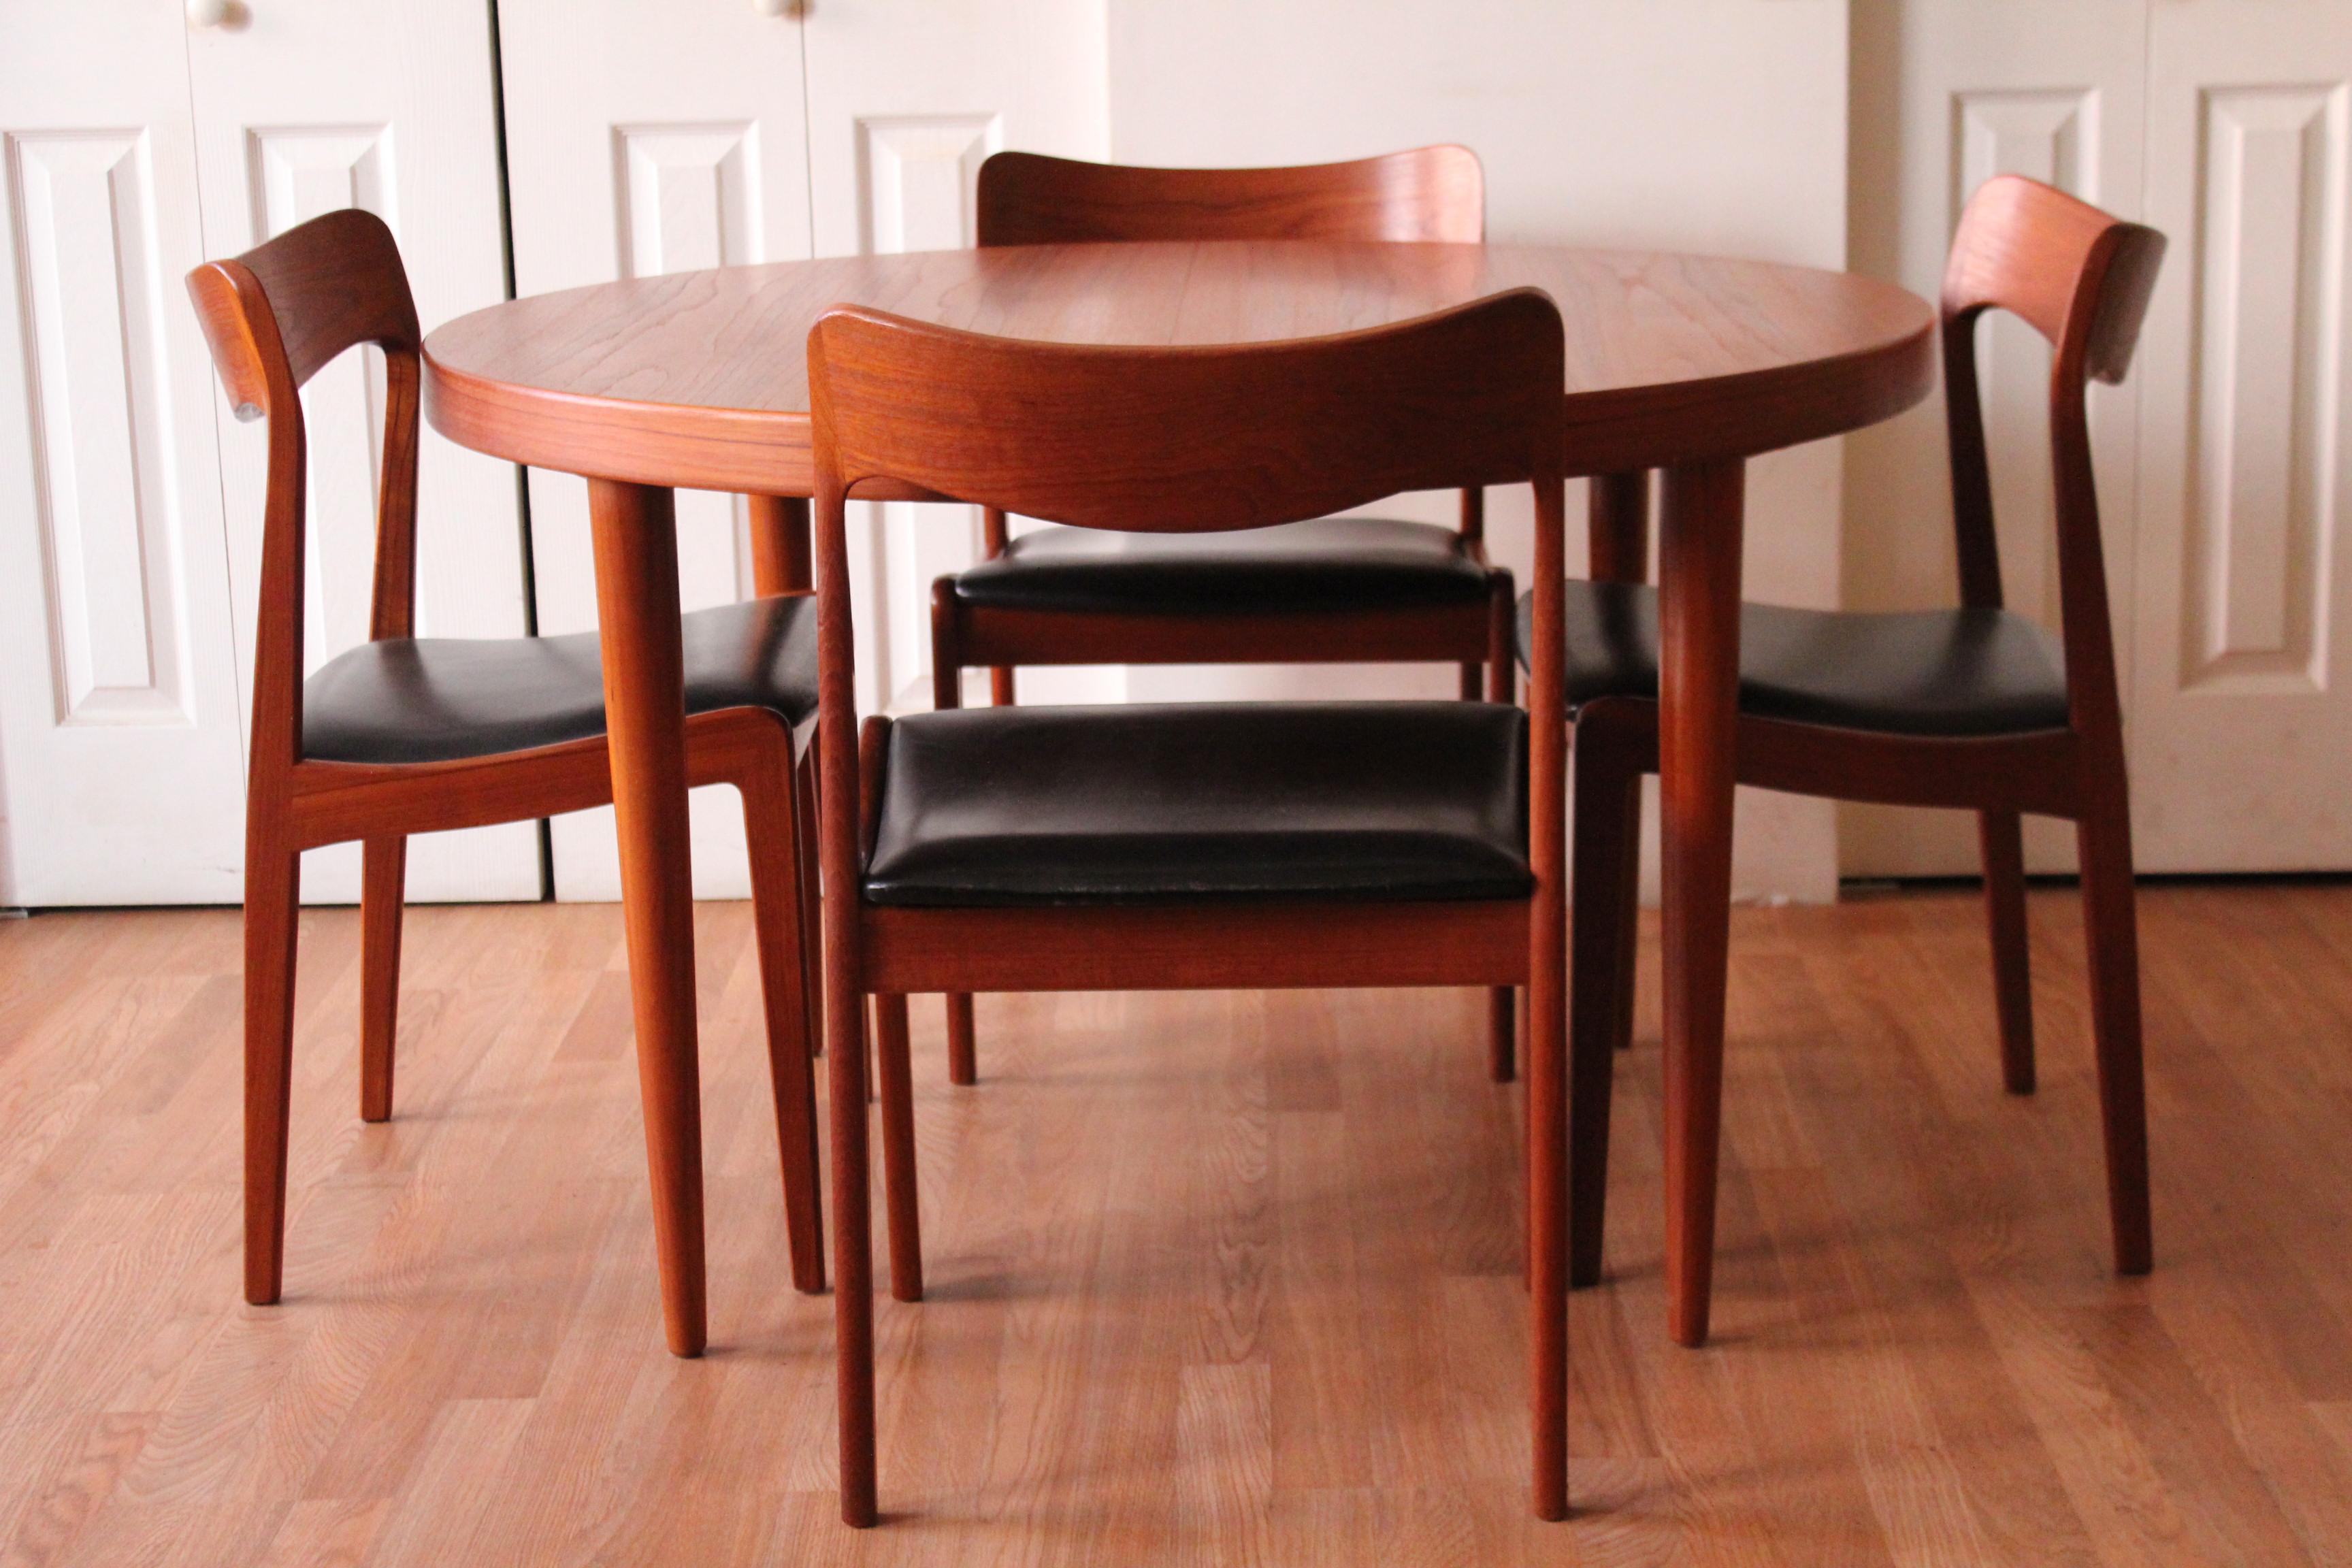 Kai Kristiansen ladies and gentleman! A complete dining room set that includes:
A dining table that comes complete with 2 leaves that opens easily to accommodate your entire family. The eight chairs are covered with the original black leather, with